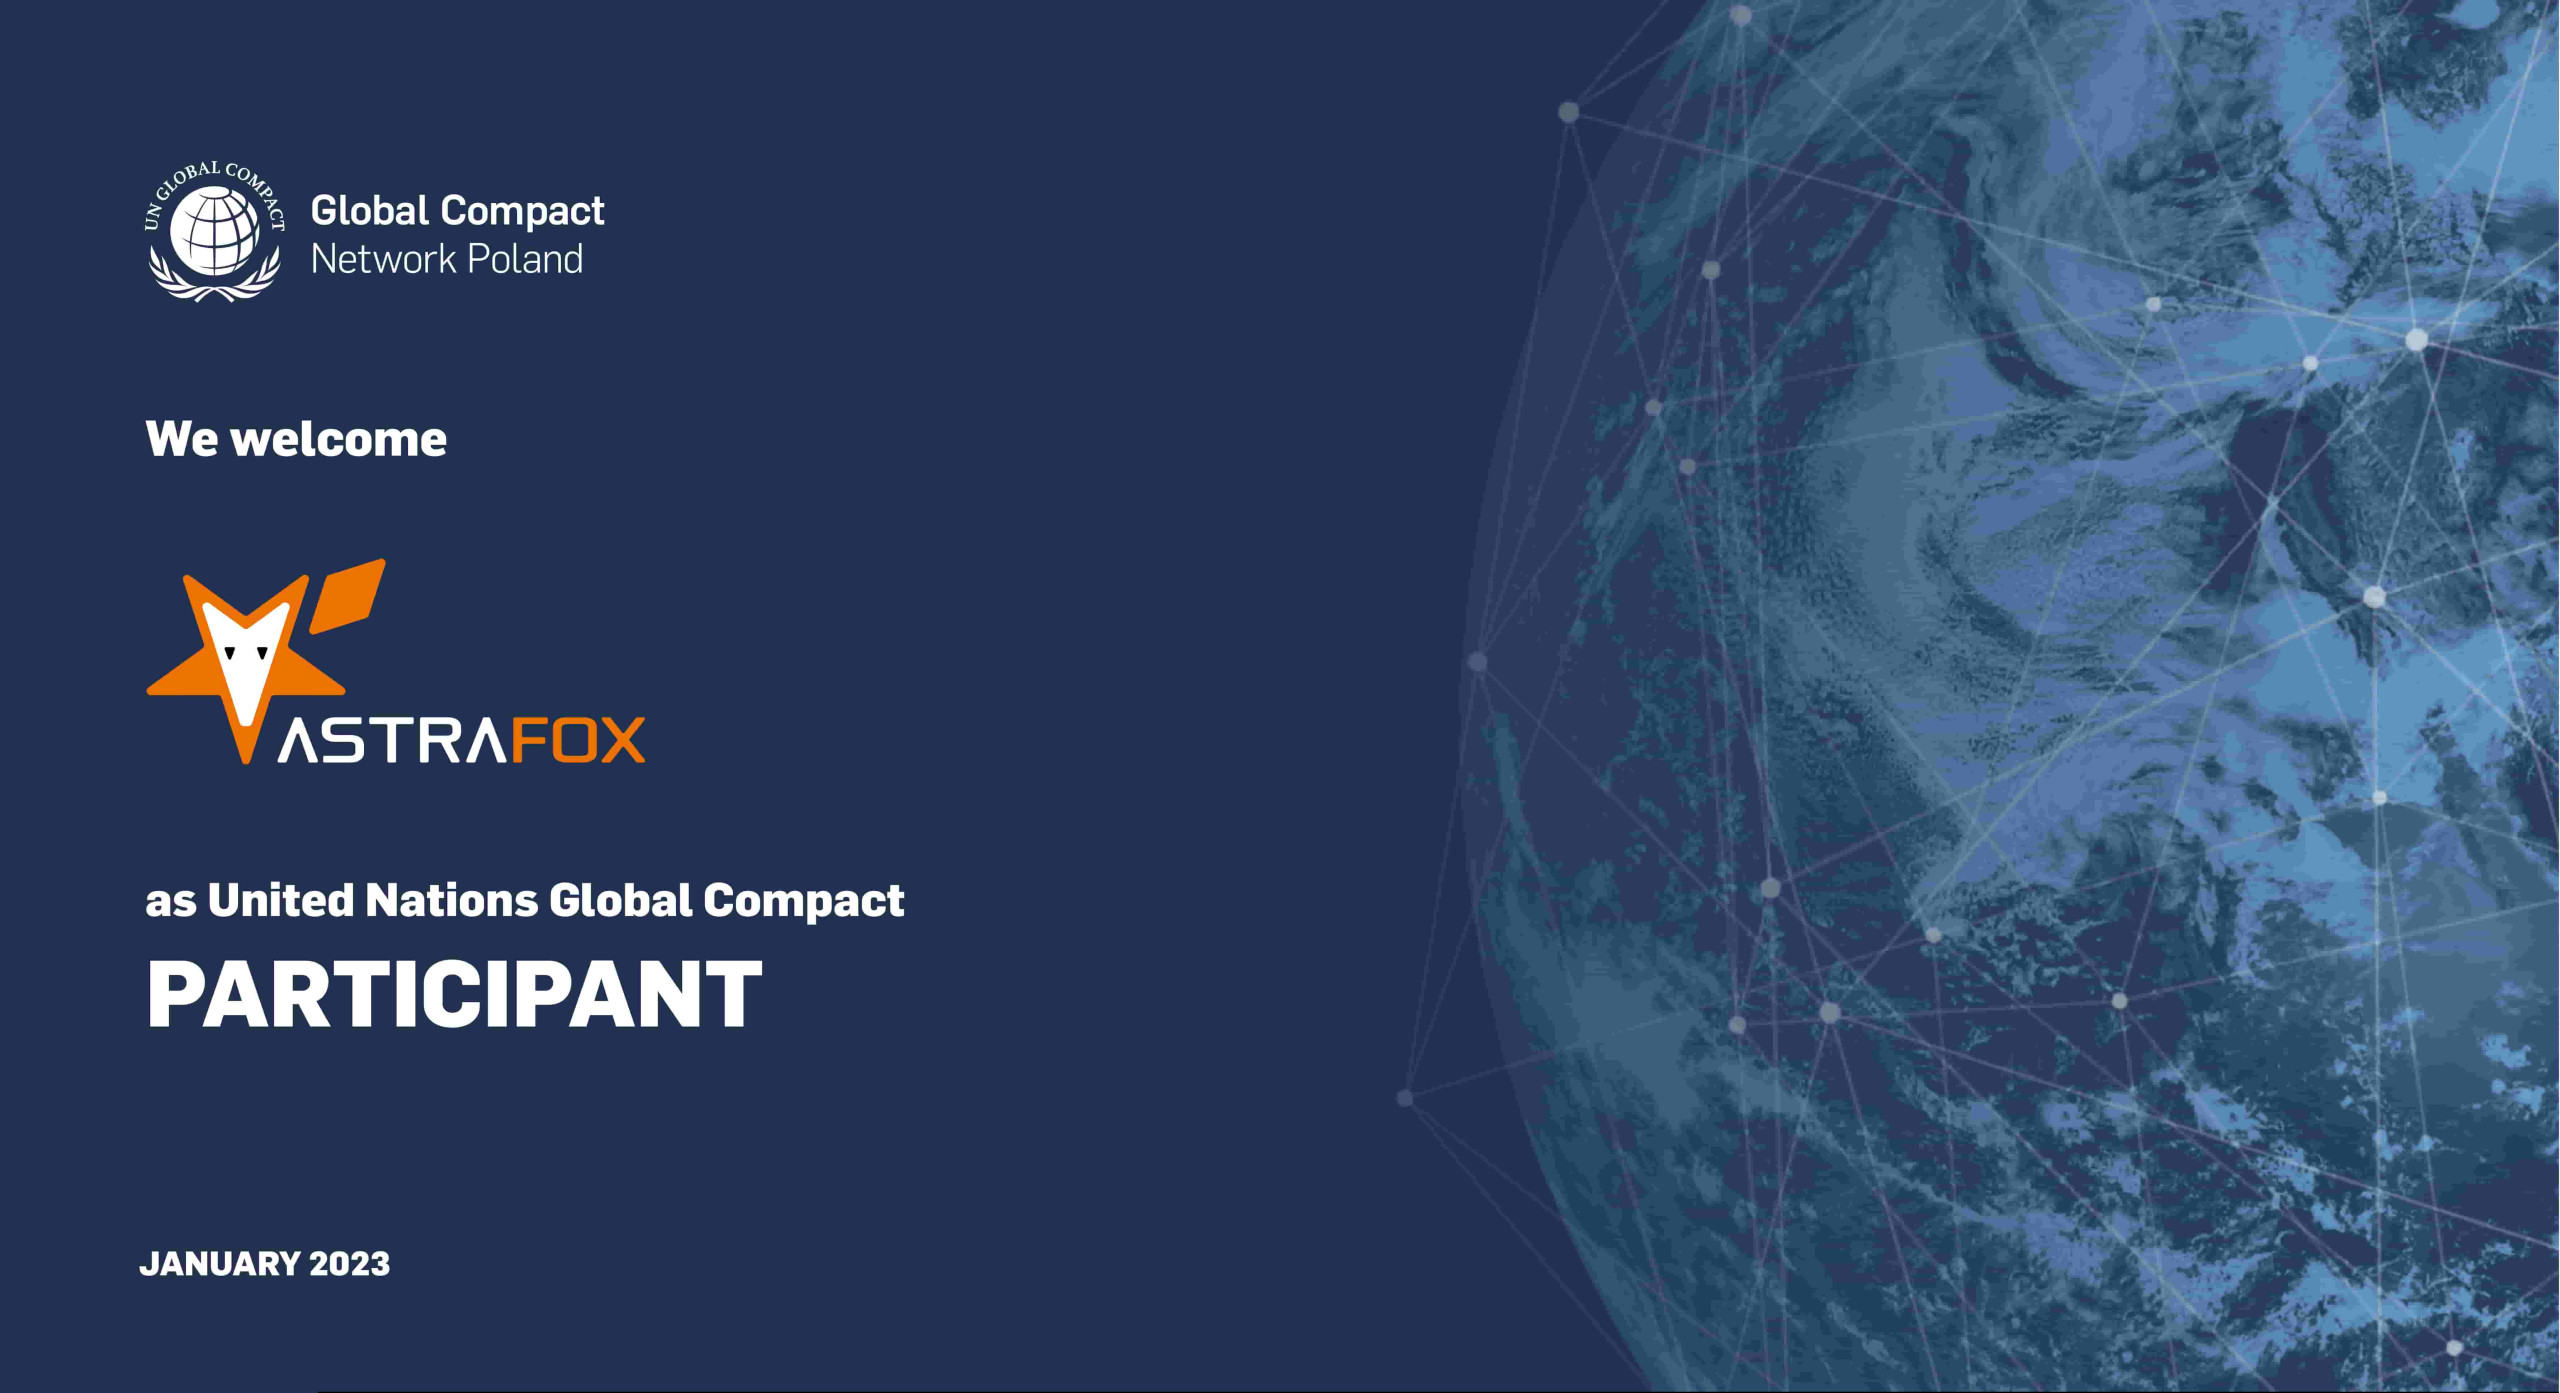 Certyfikat Astrafox United Nations Global Compact